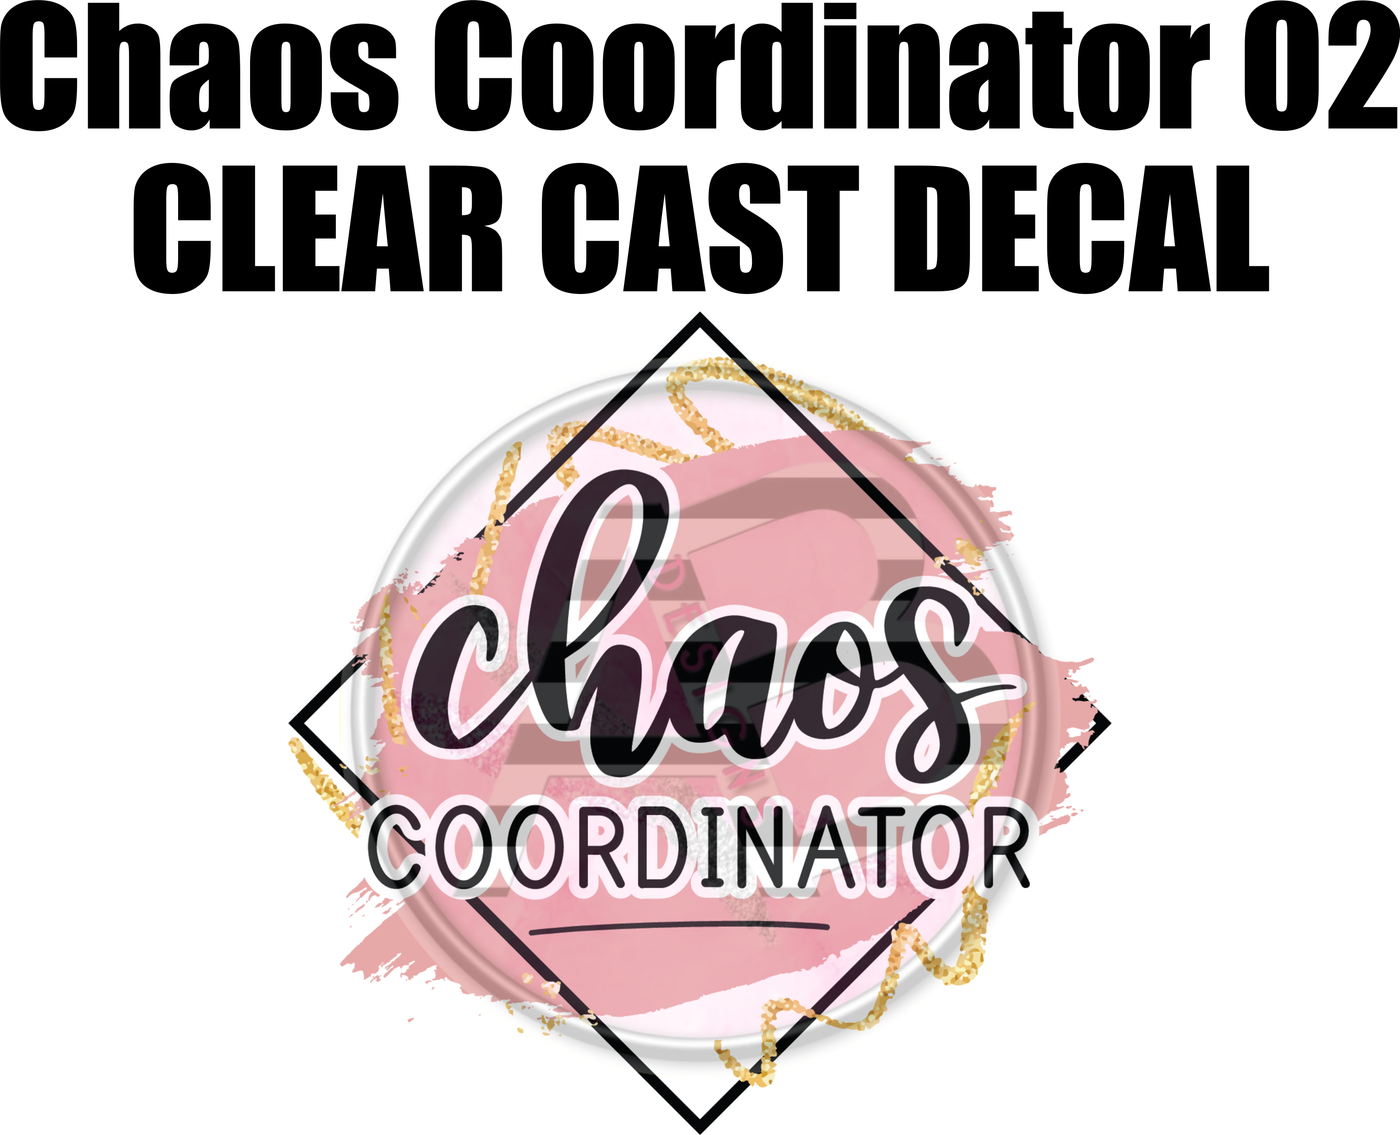 Chaos Coordinator 02 - Clear Cast Decal